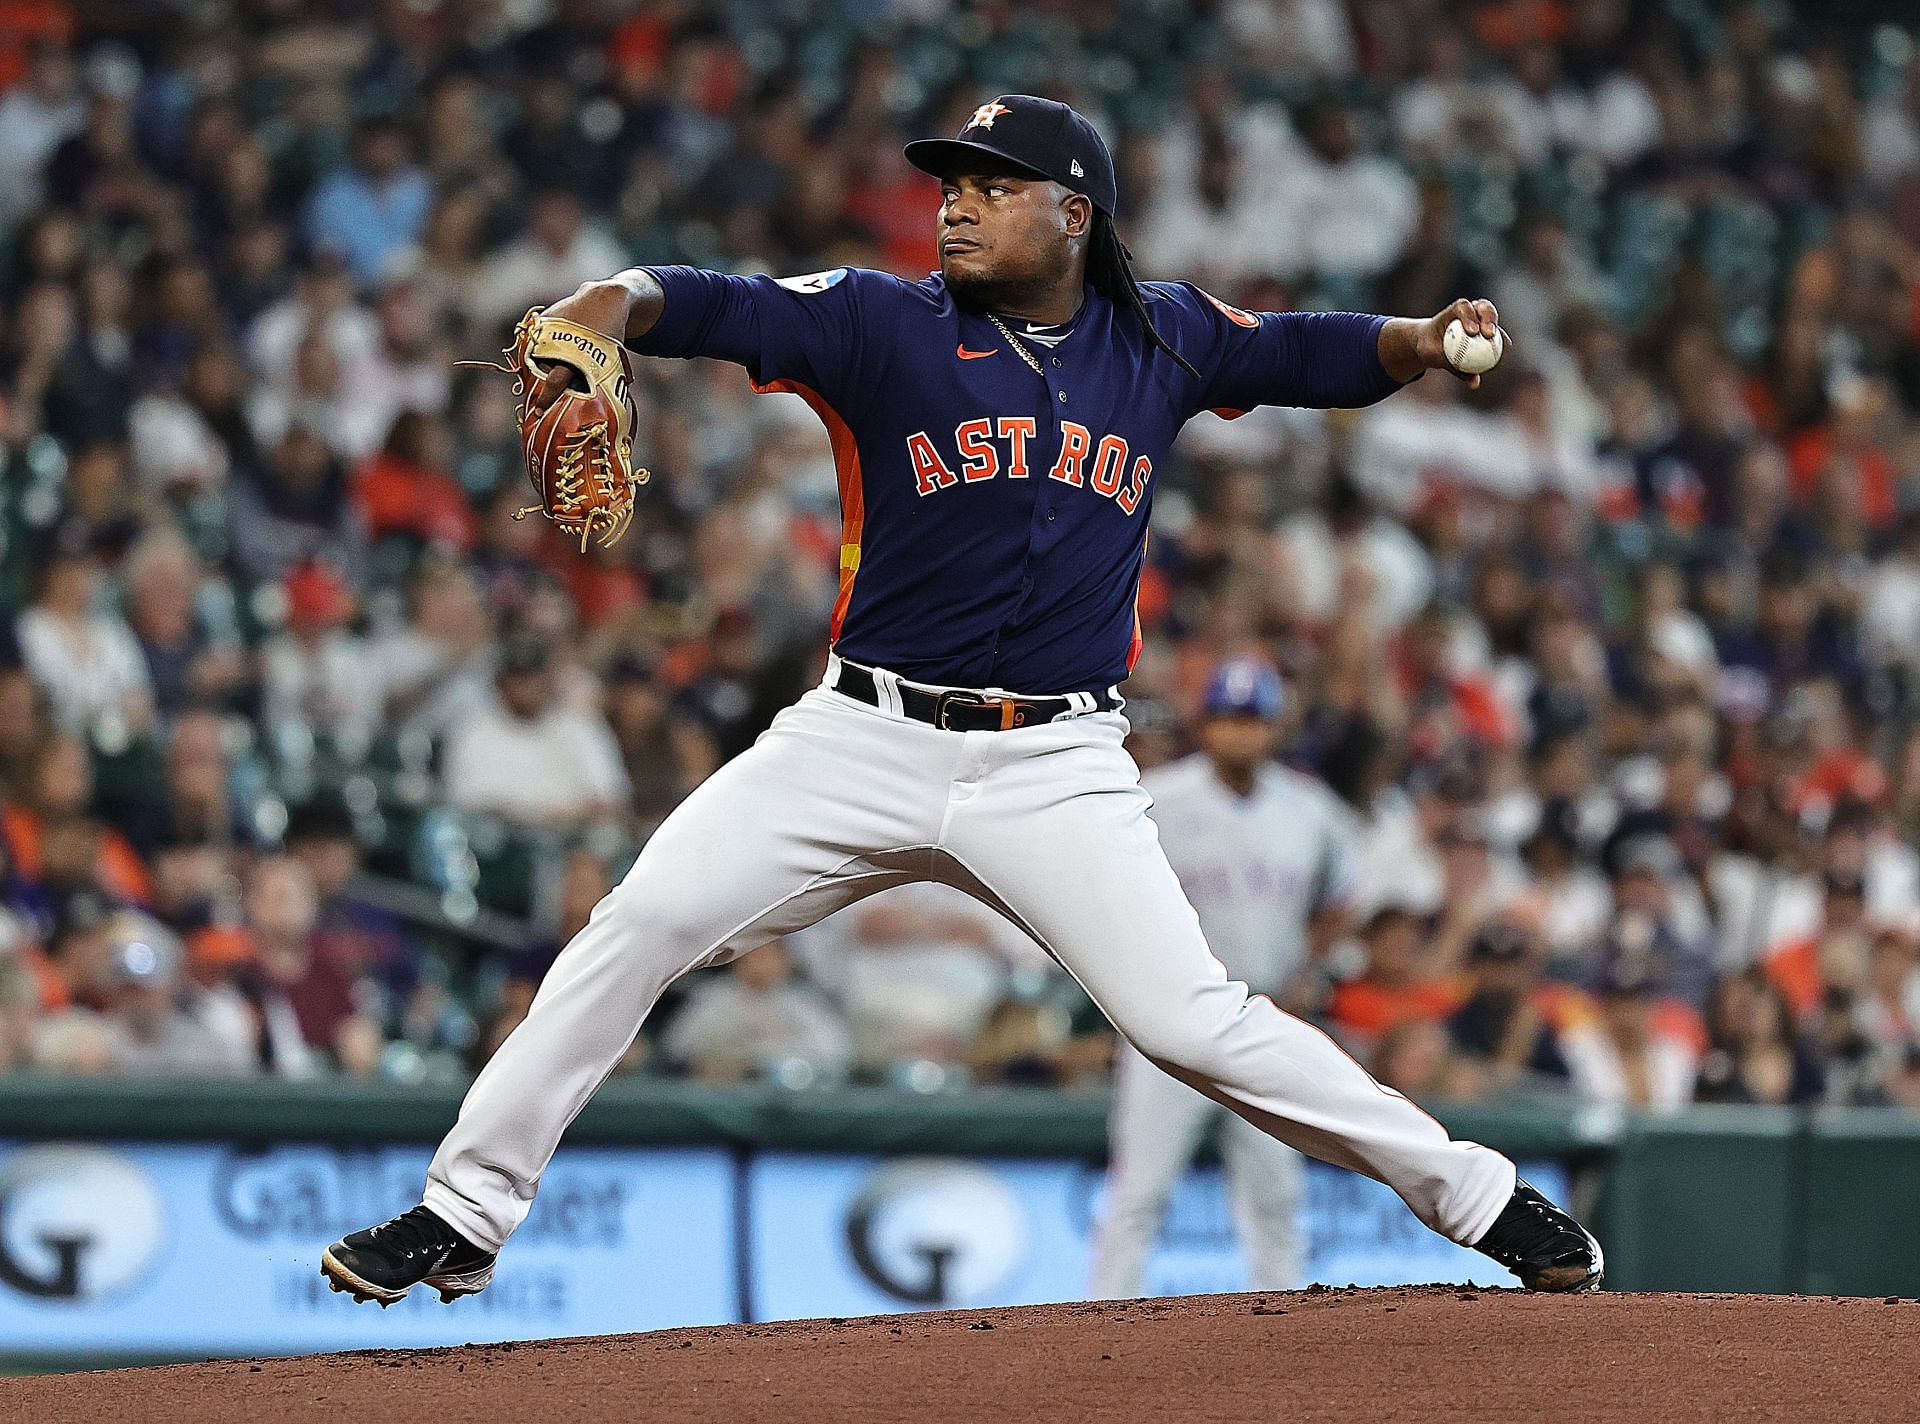 Jeremy Peña gearing up for second season with Houston Astros